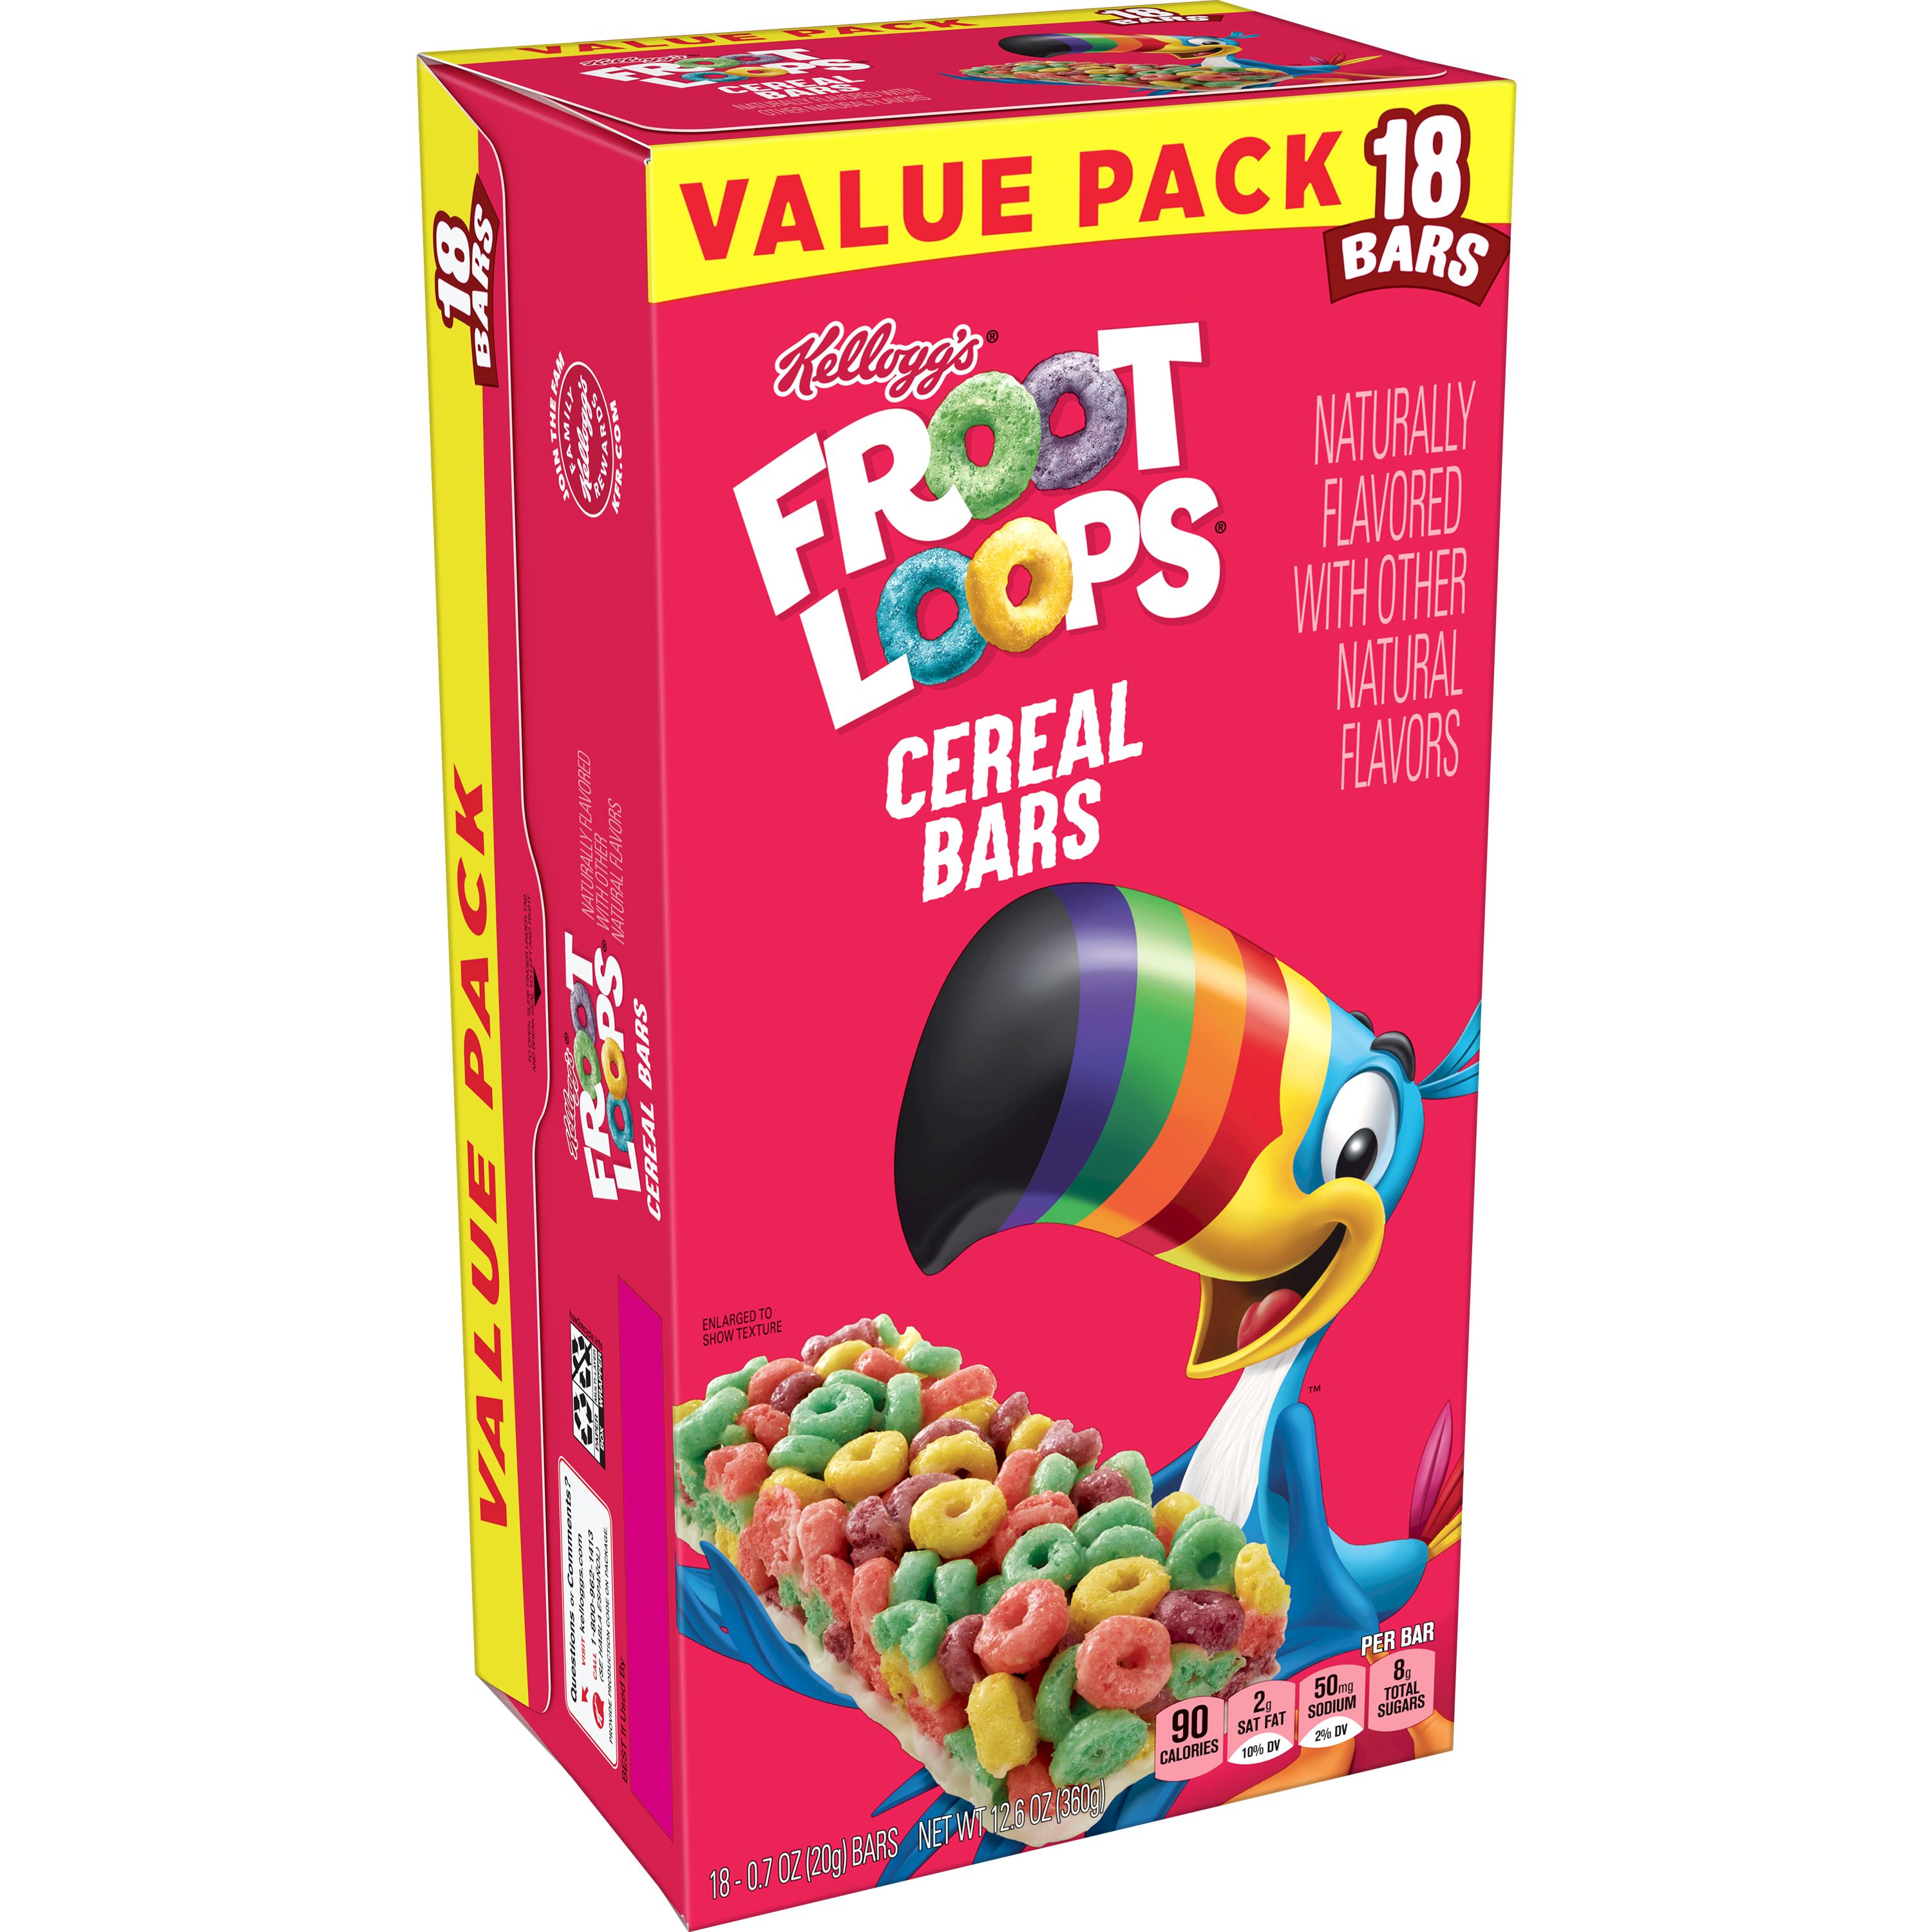 Froot Loops Cereal Bars, Value Pack - 18 pack, 0.7 oz bars